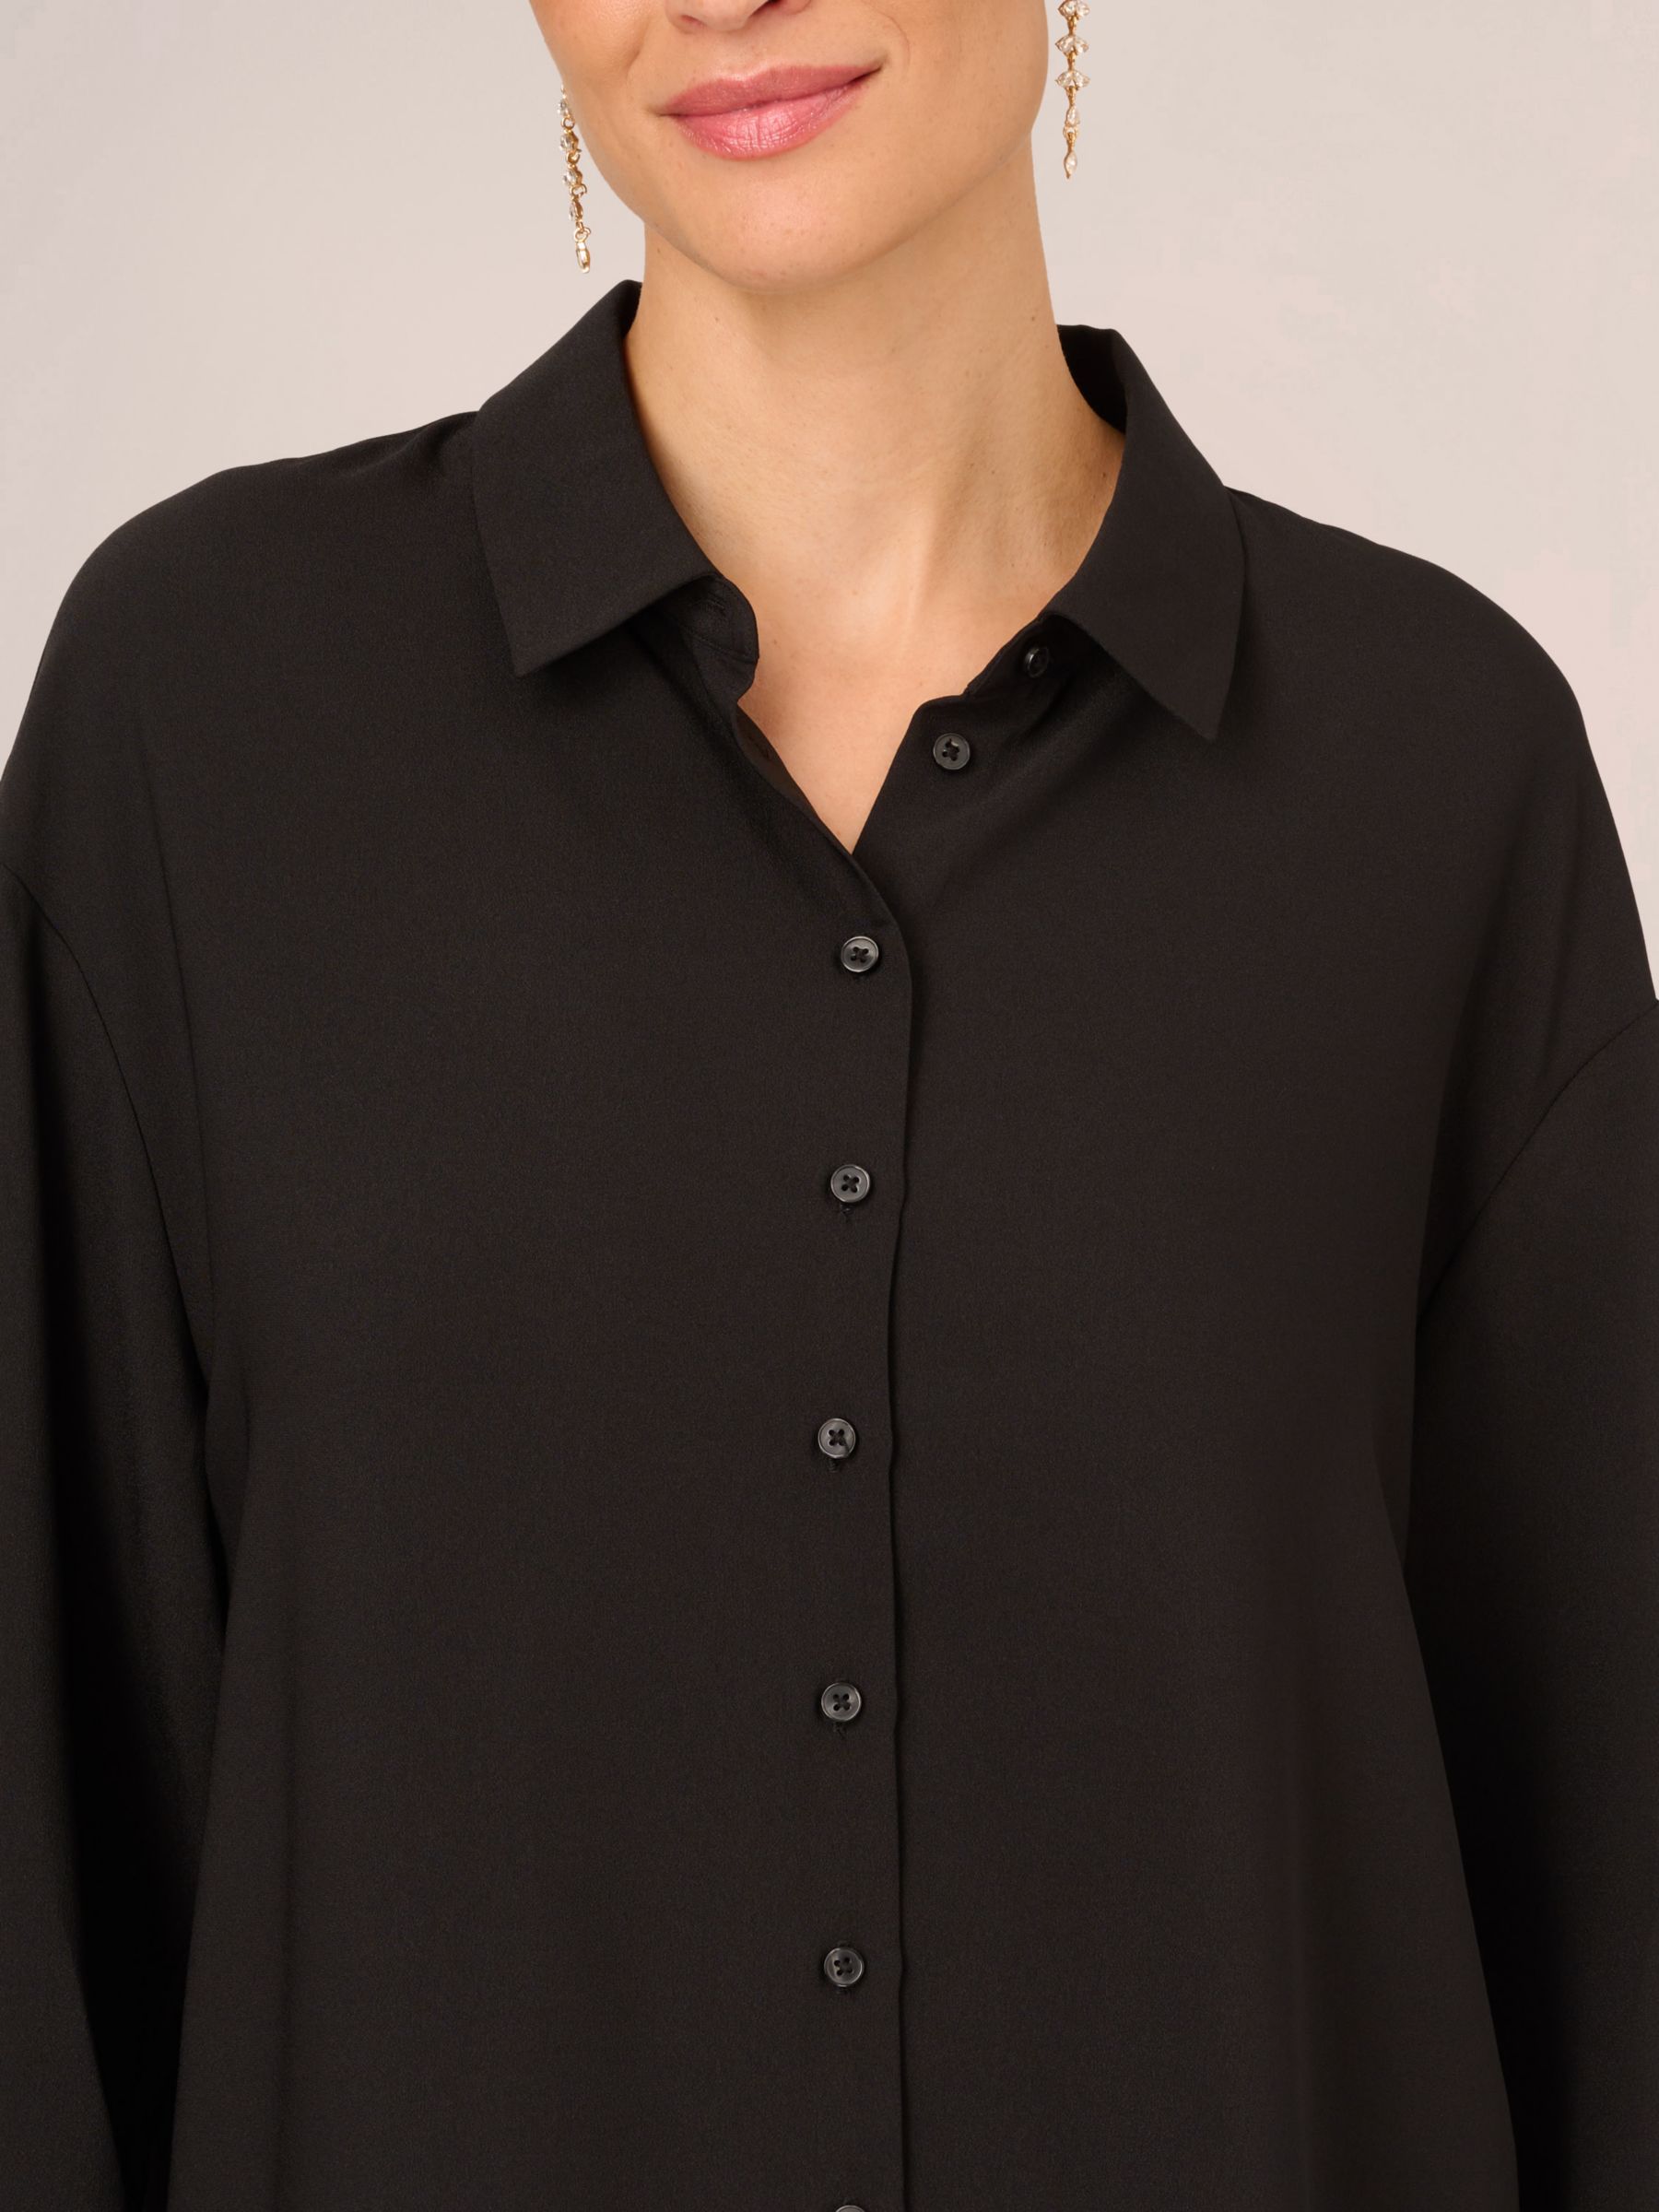 Adrianna Papell Solid Button Front Shirt